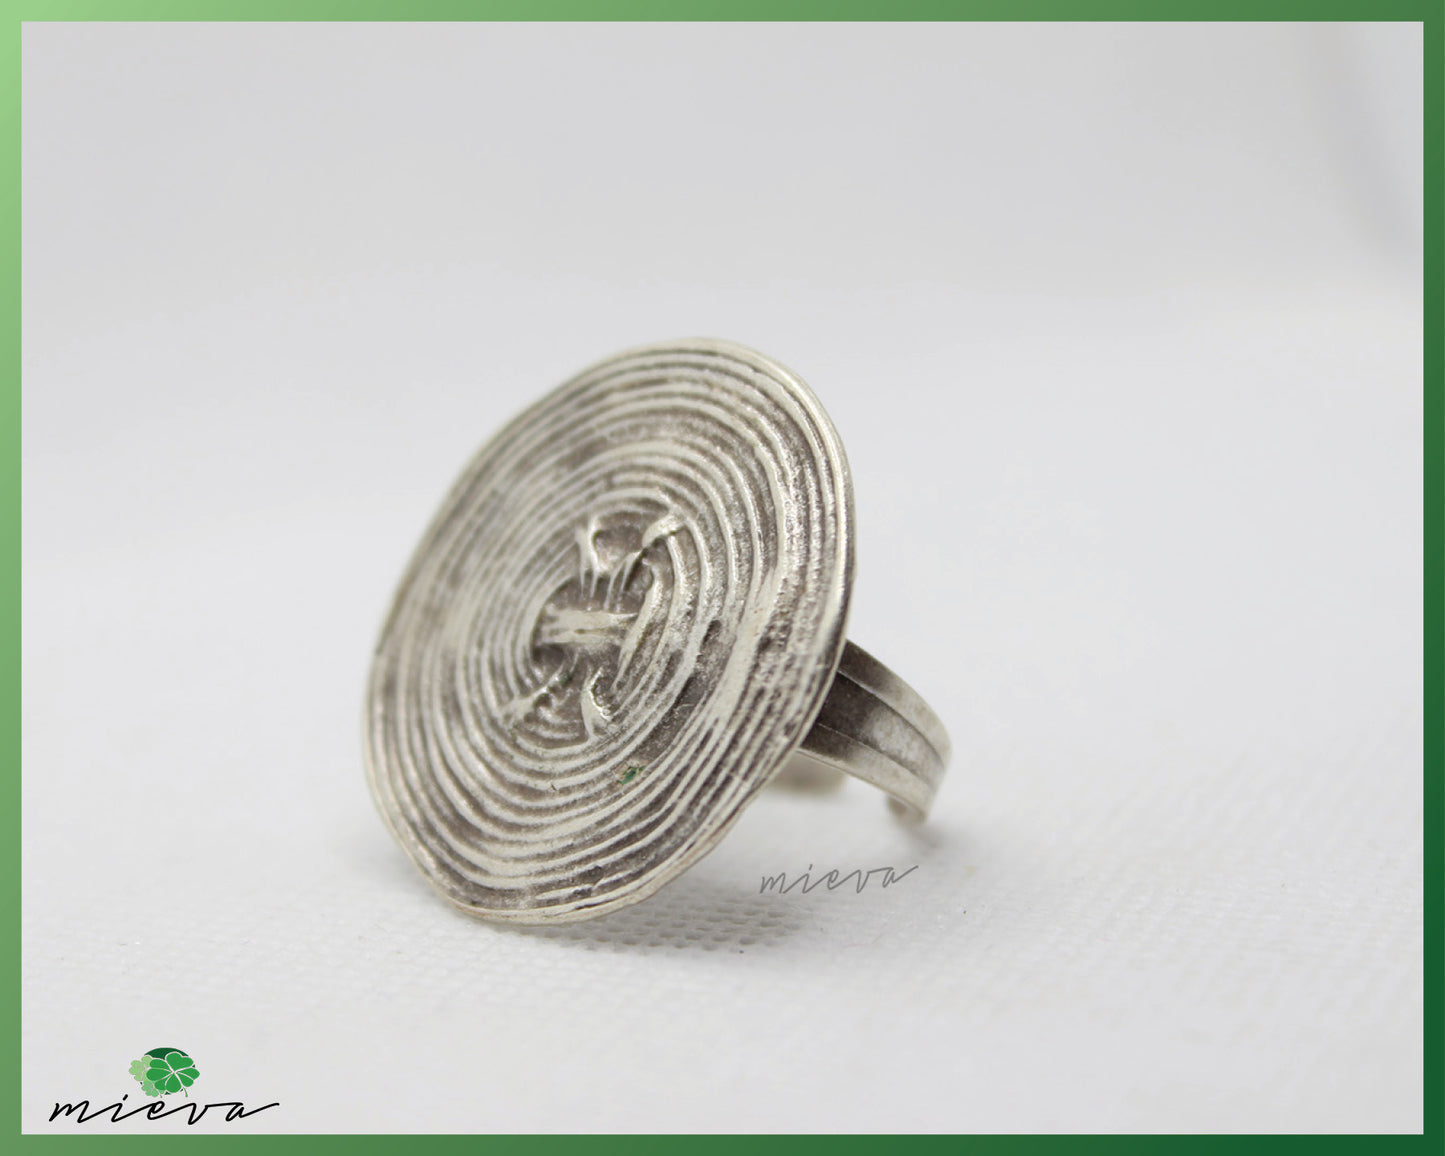 Modernist Textured Silver Disc Ring